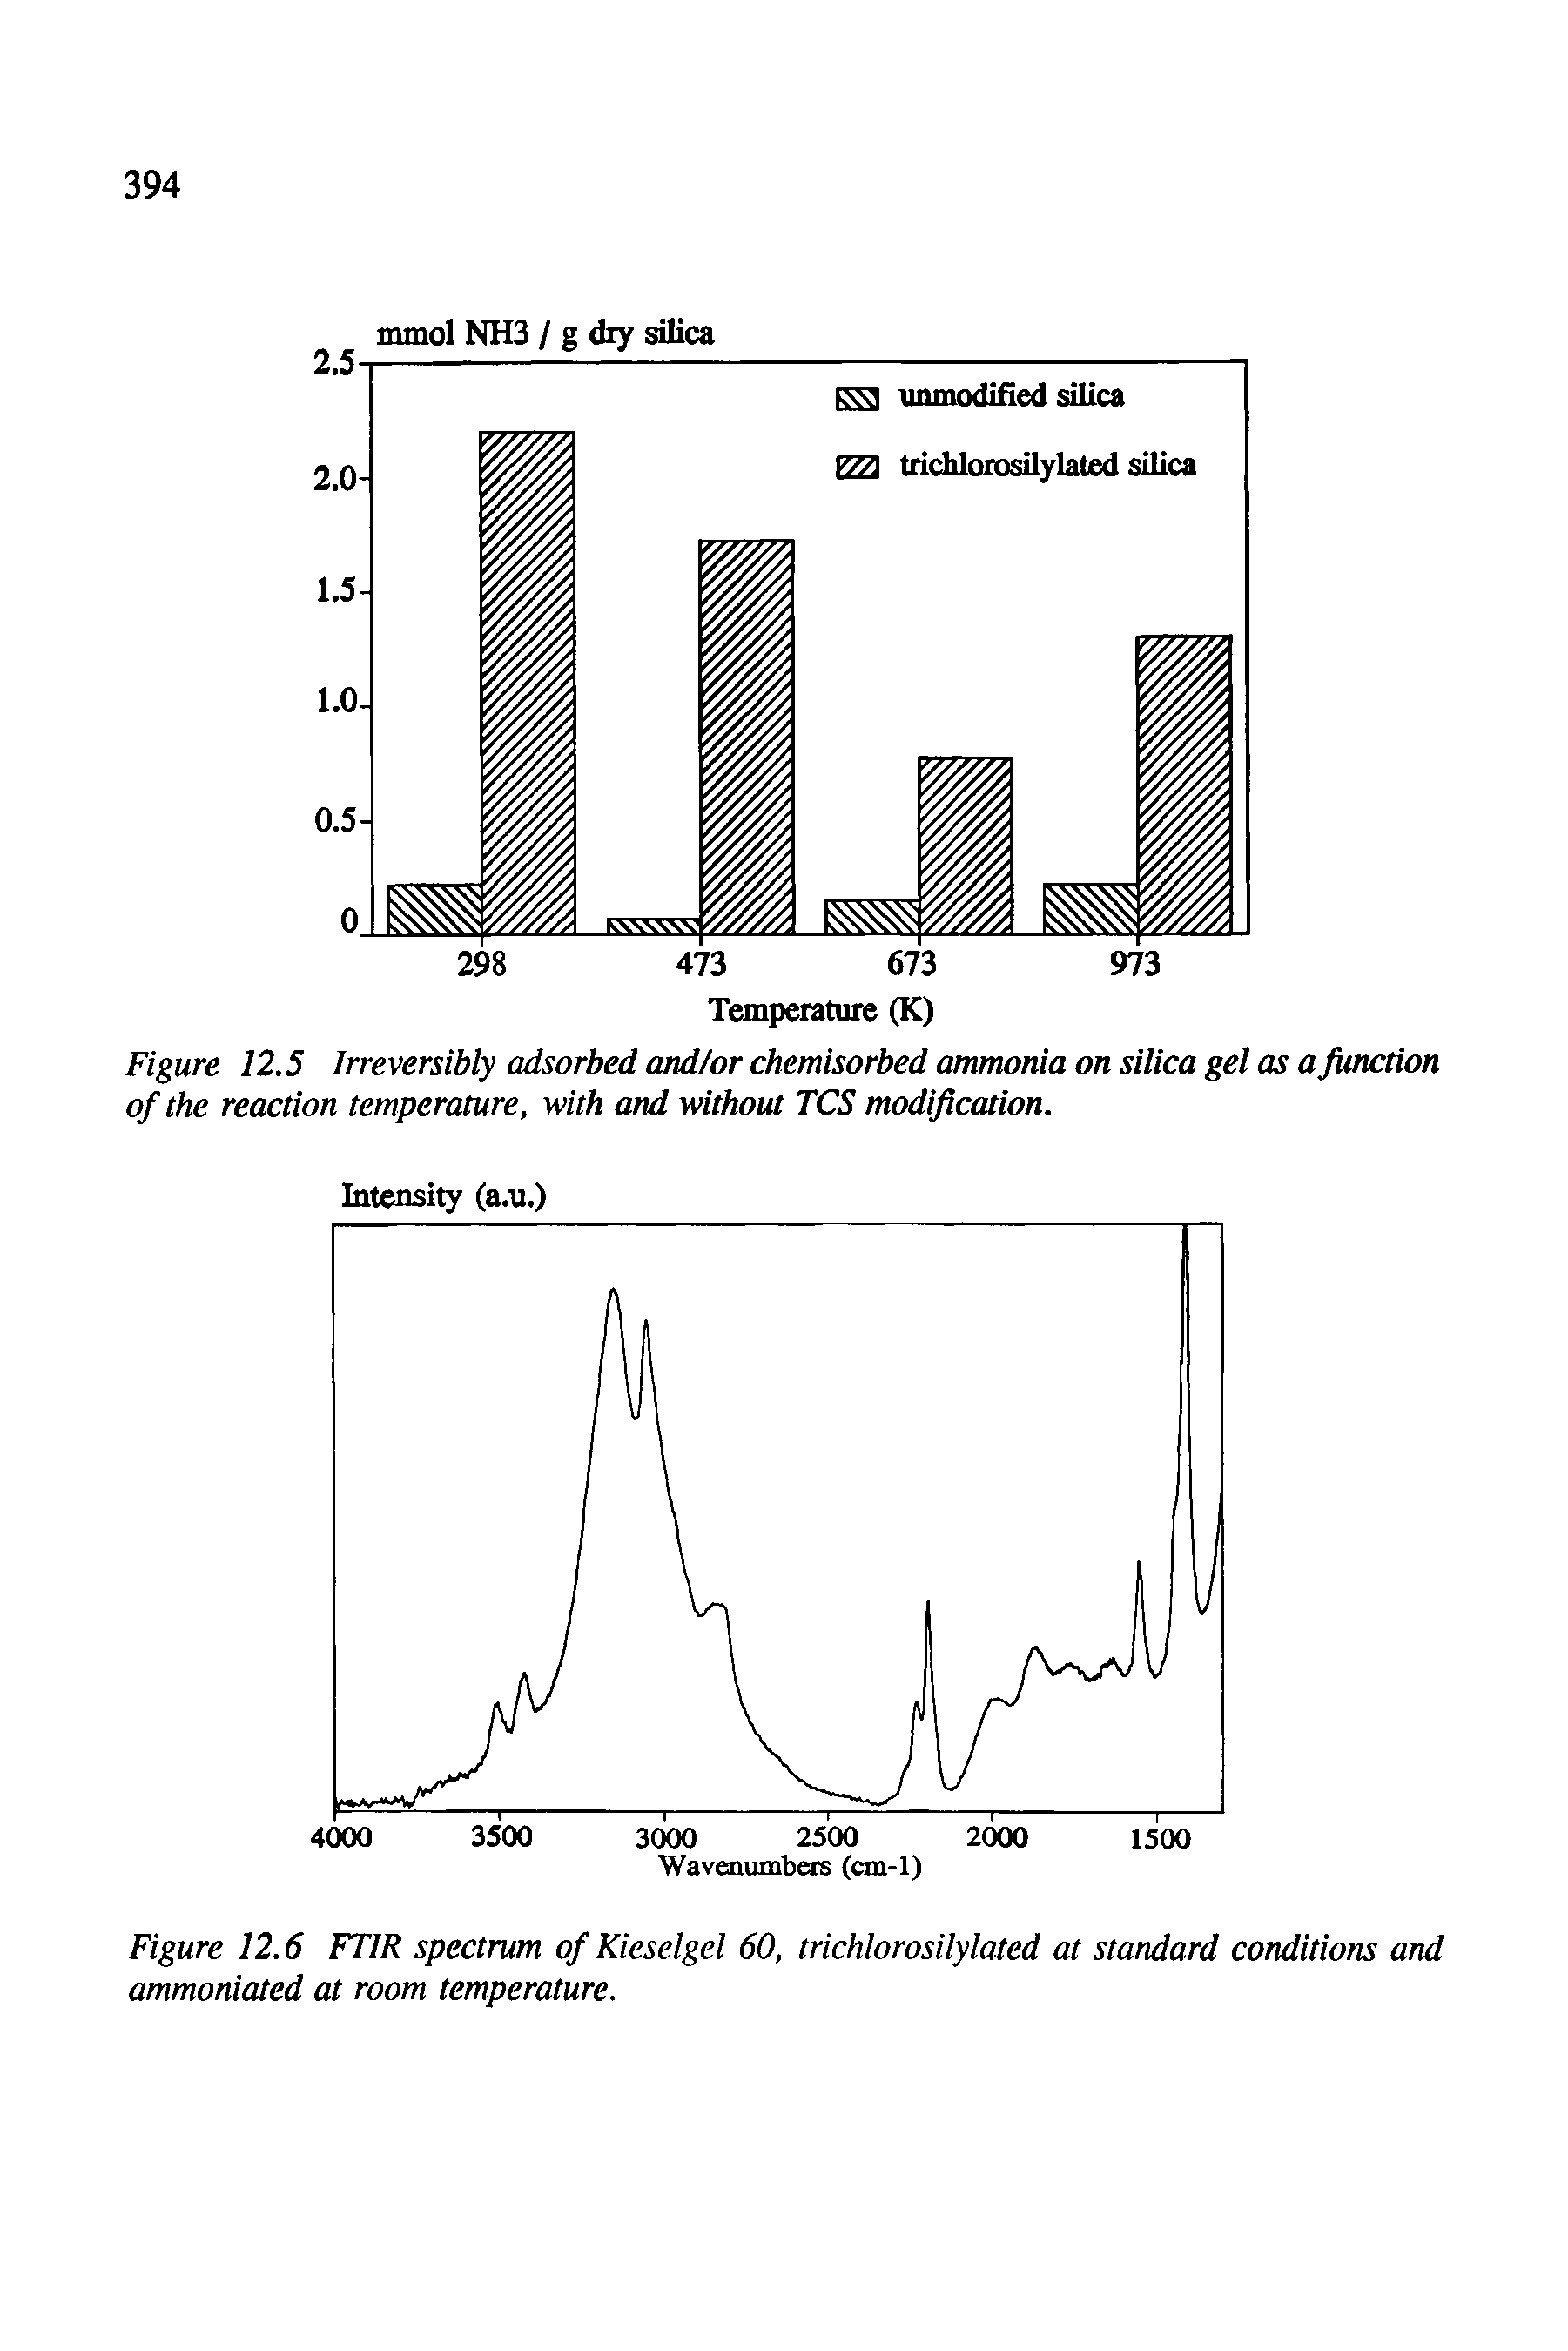 Figure 12.5 Irreversibly adsorbed and/or chemisorbed ammonia on silica gel as a Junction of the reaction temperature, with and without TCS modification.